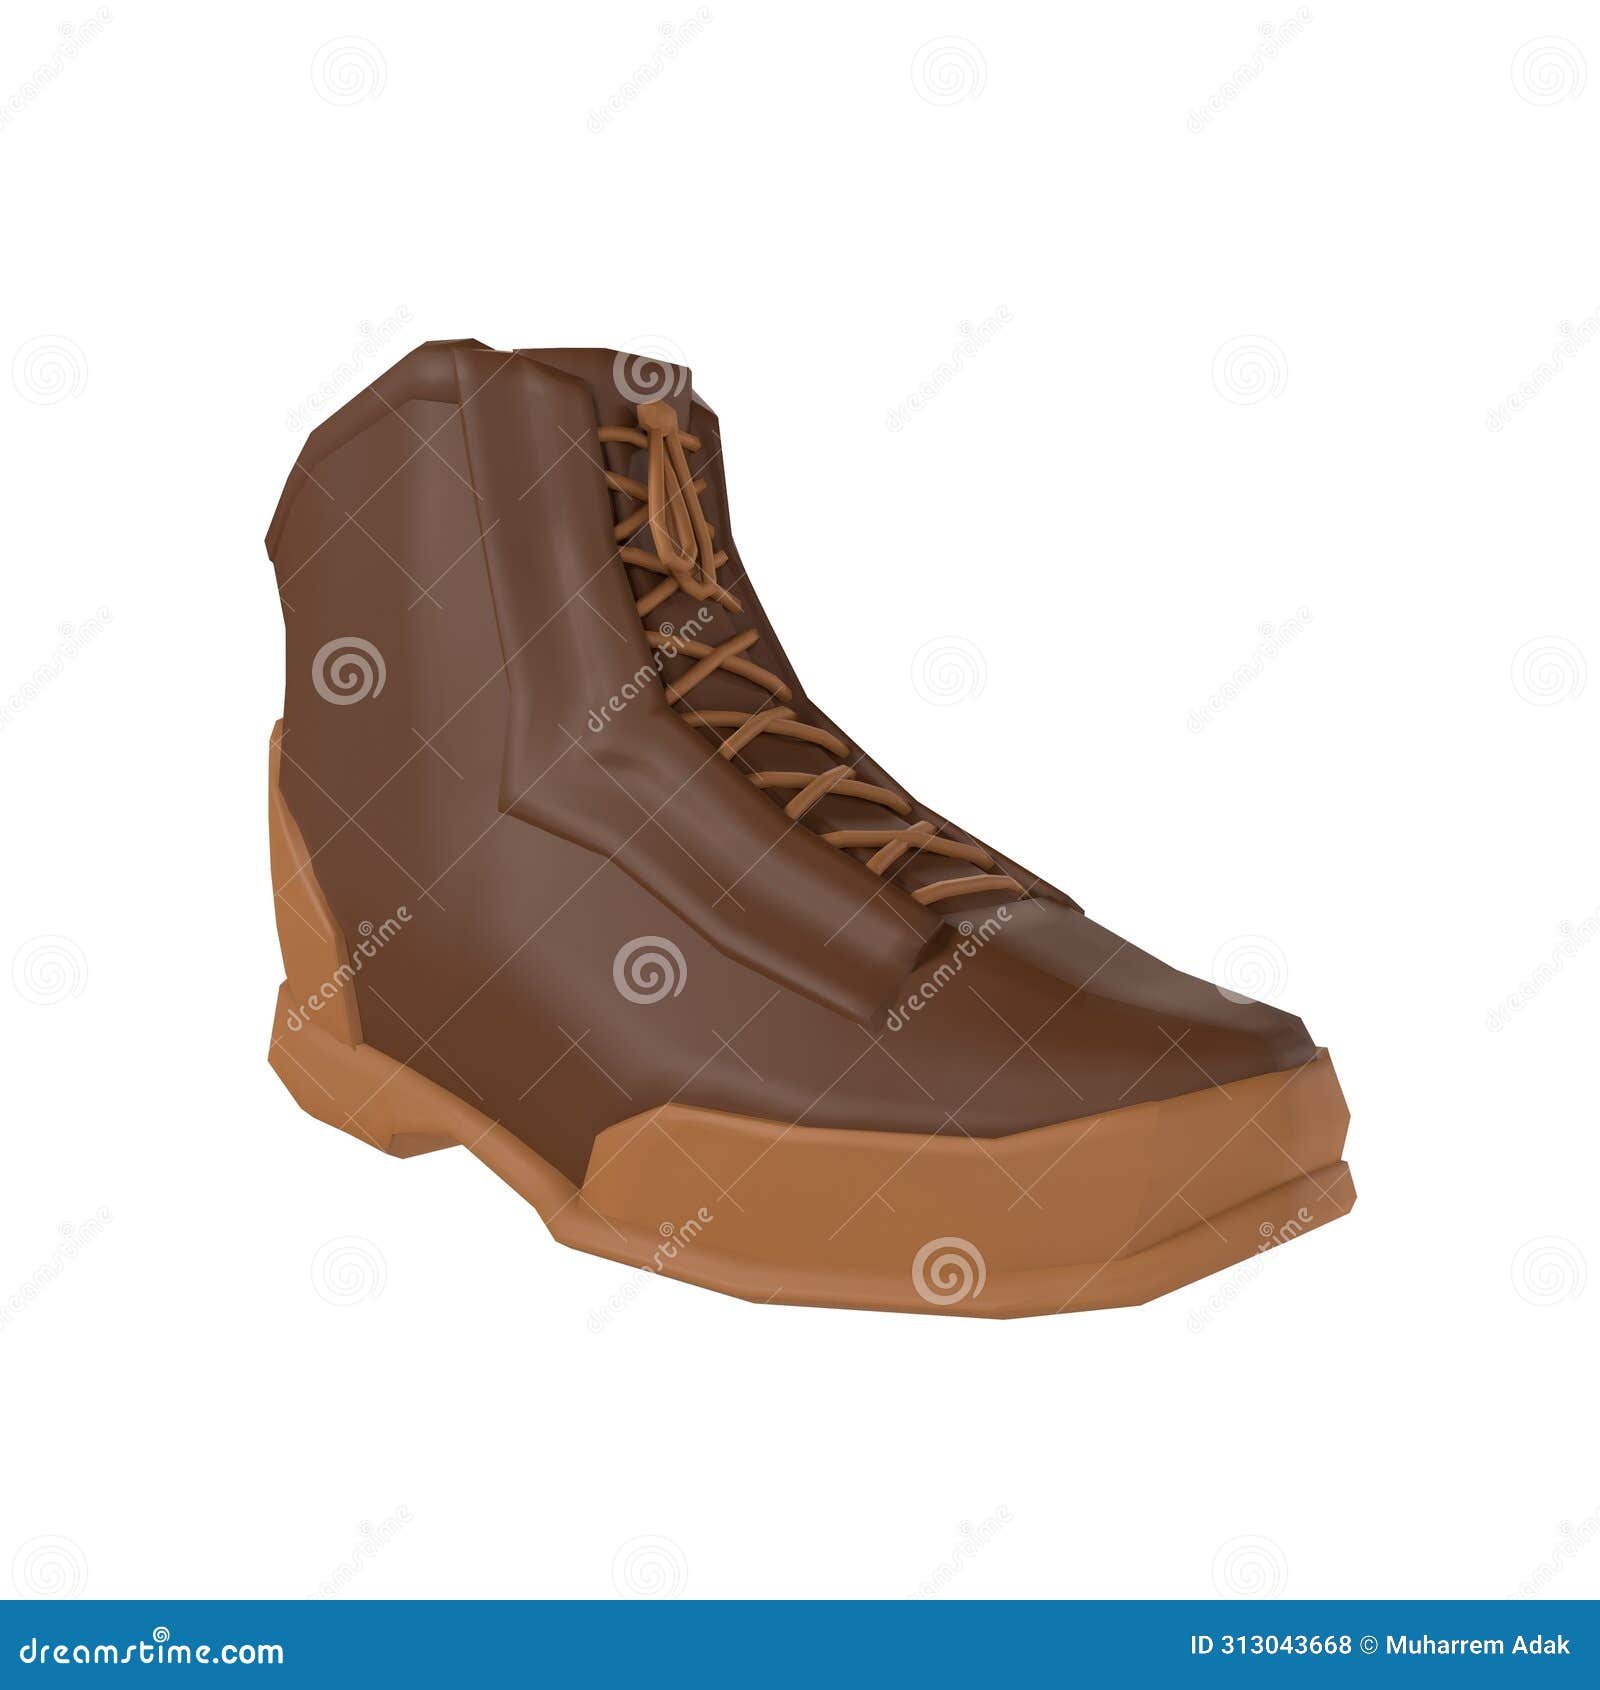 military boot  on white background